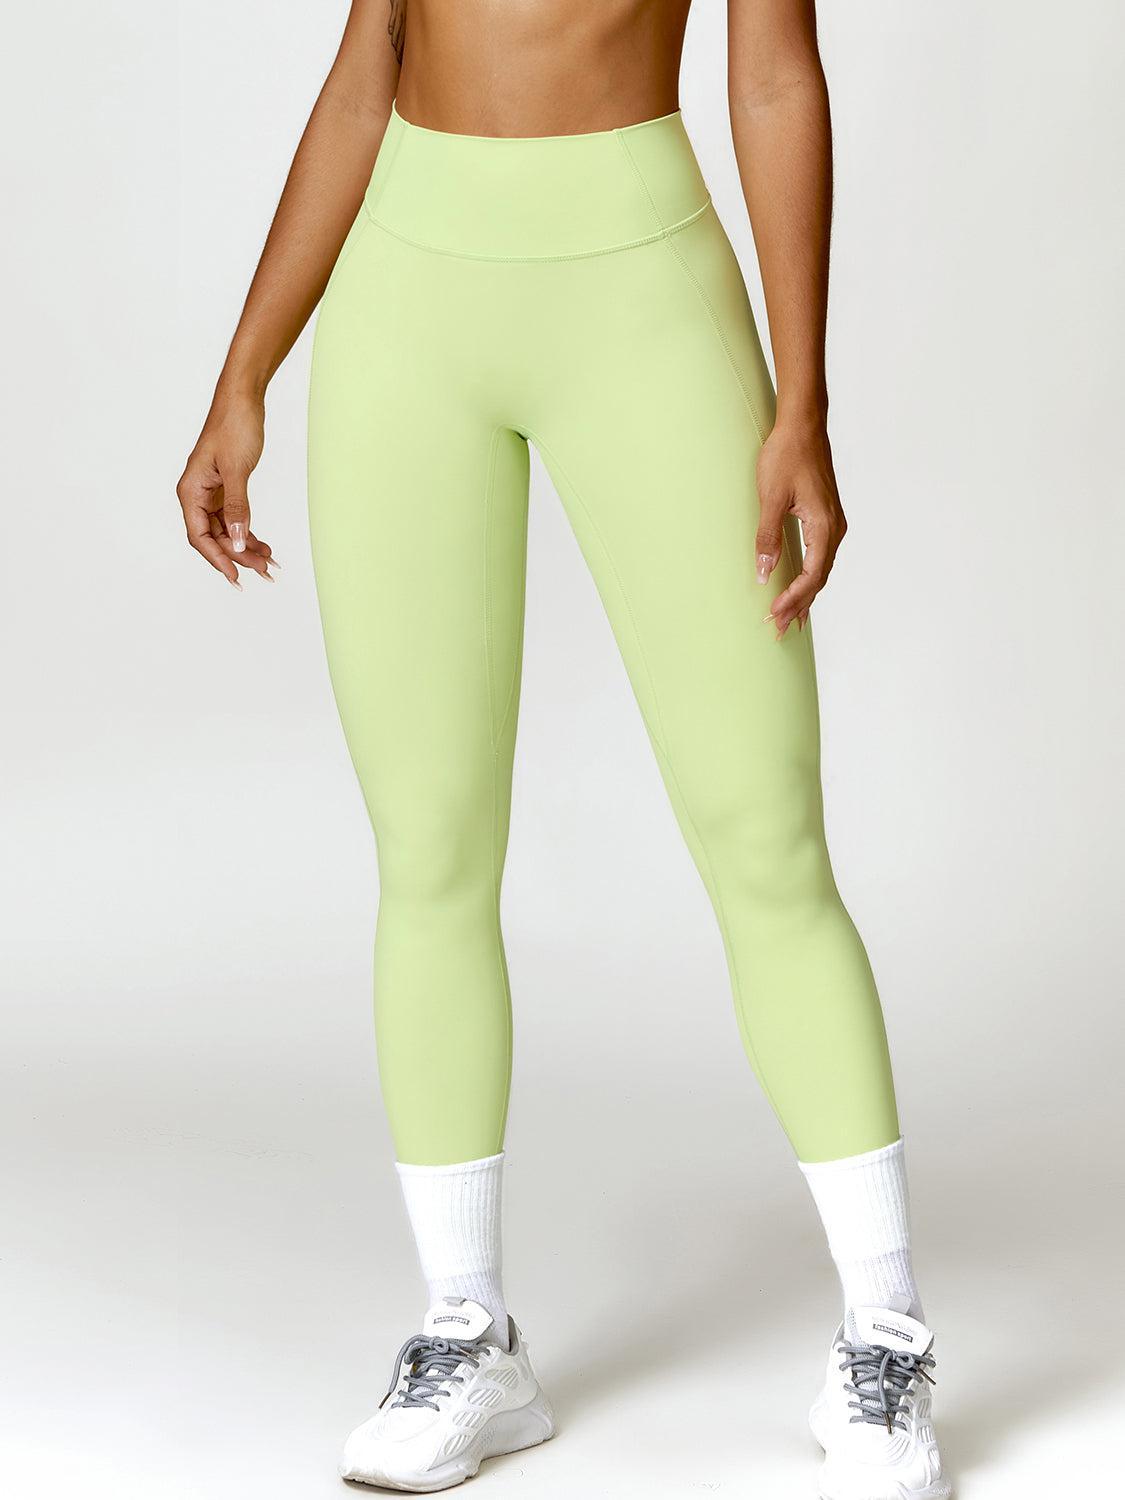 a woman in a sports bra top and neon green leggings